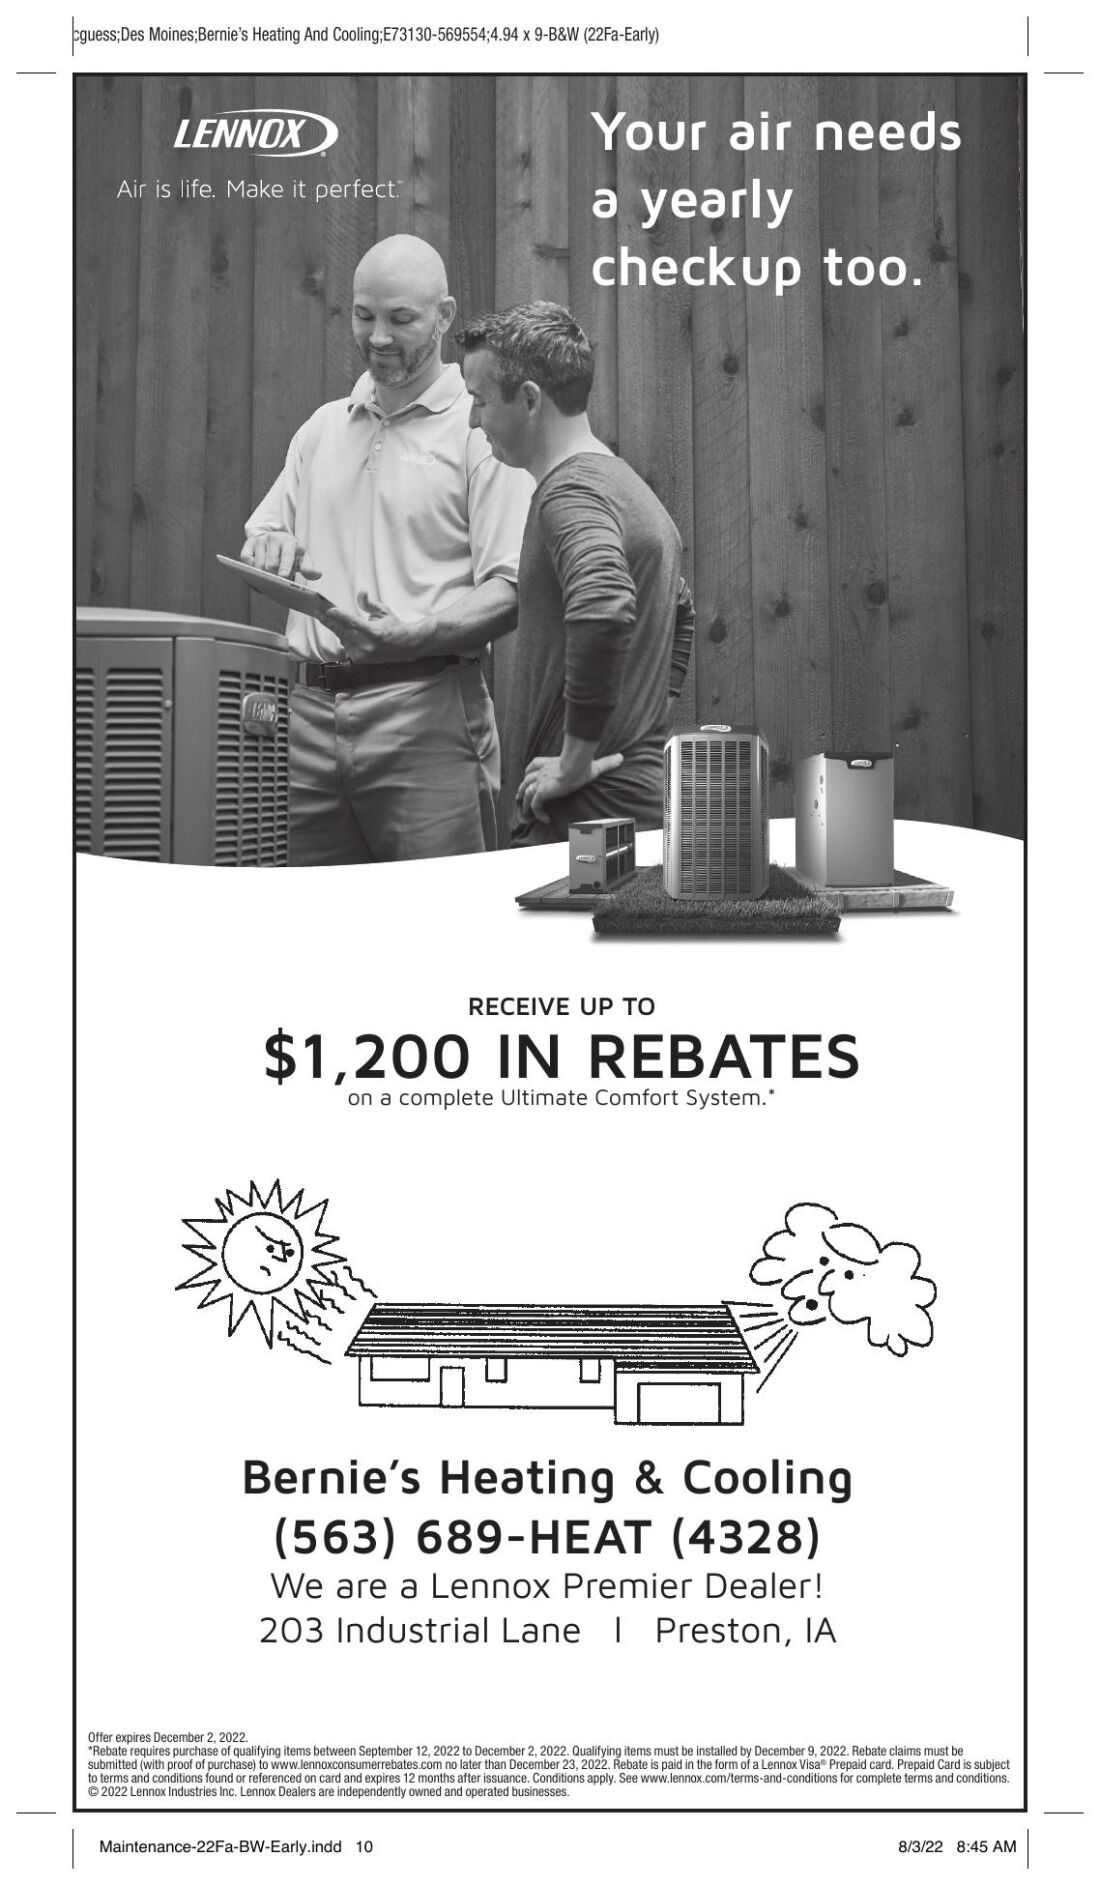 Bernie’s Heating And Cooling